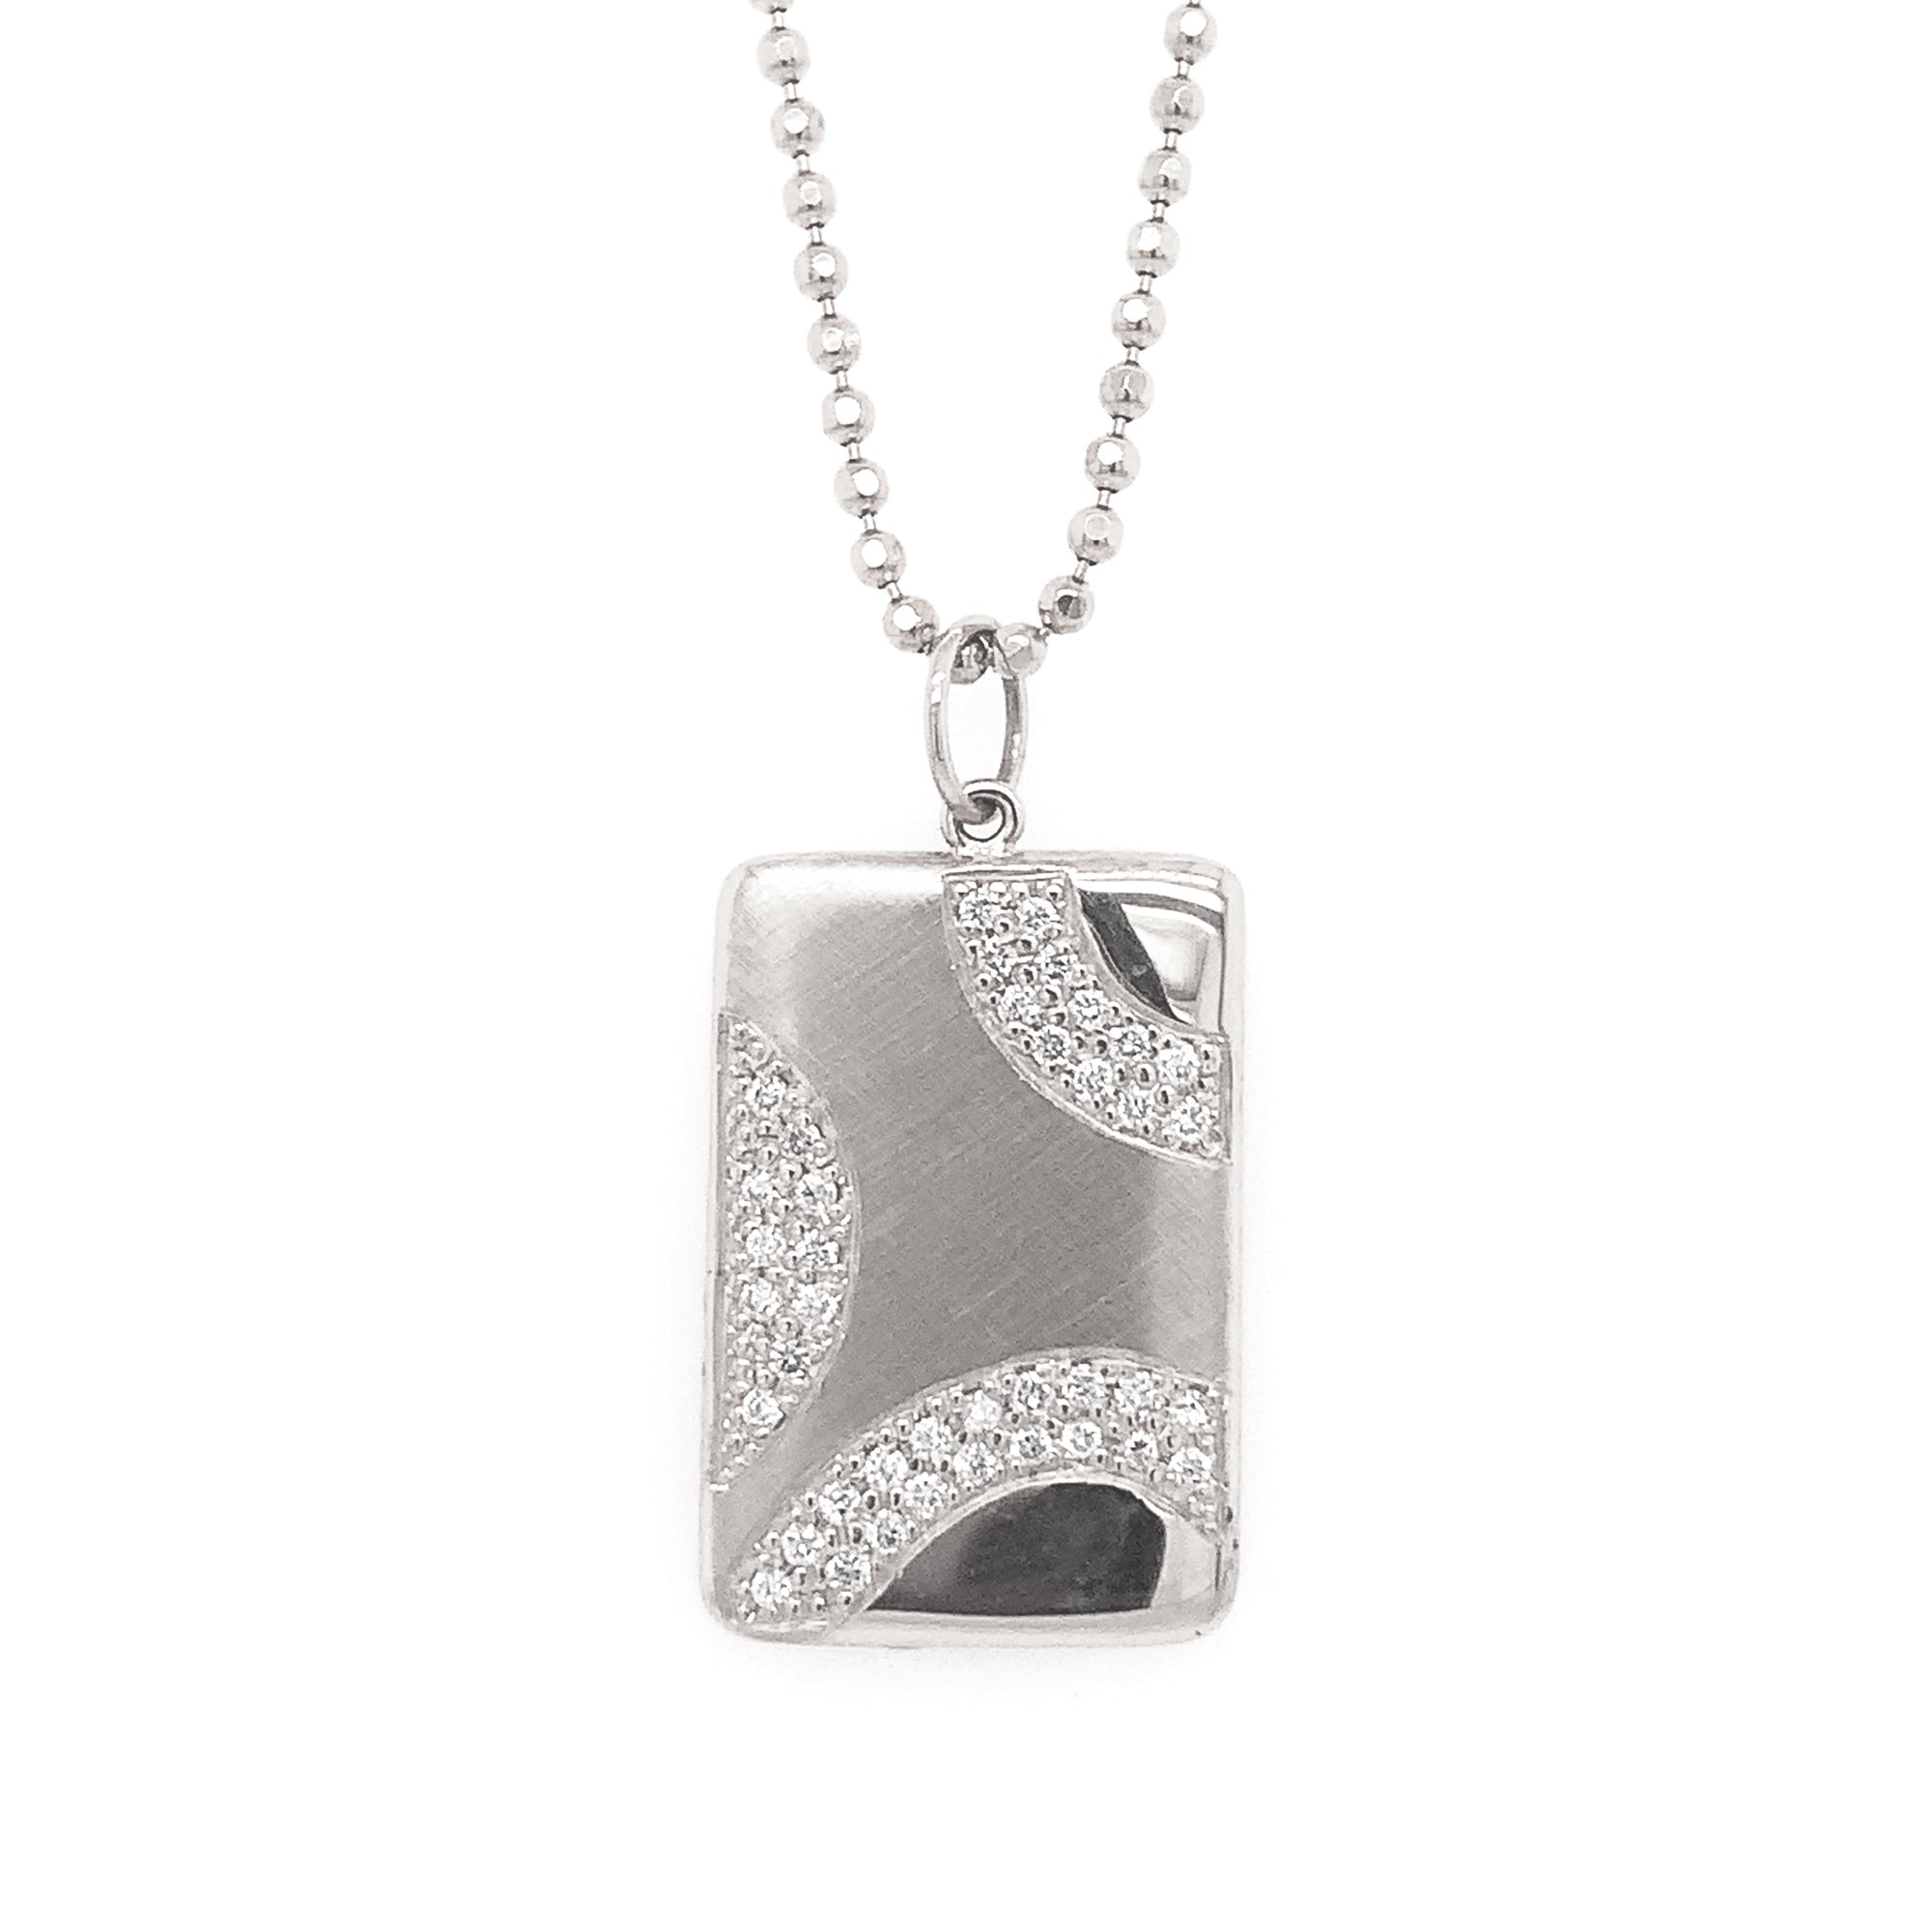 14k white gold medium CAVE pendant with complimenting shiny and satin finish and waves of white diamonds